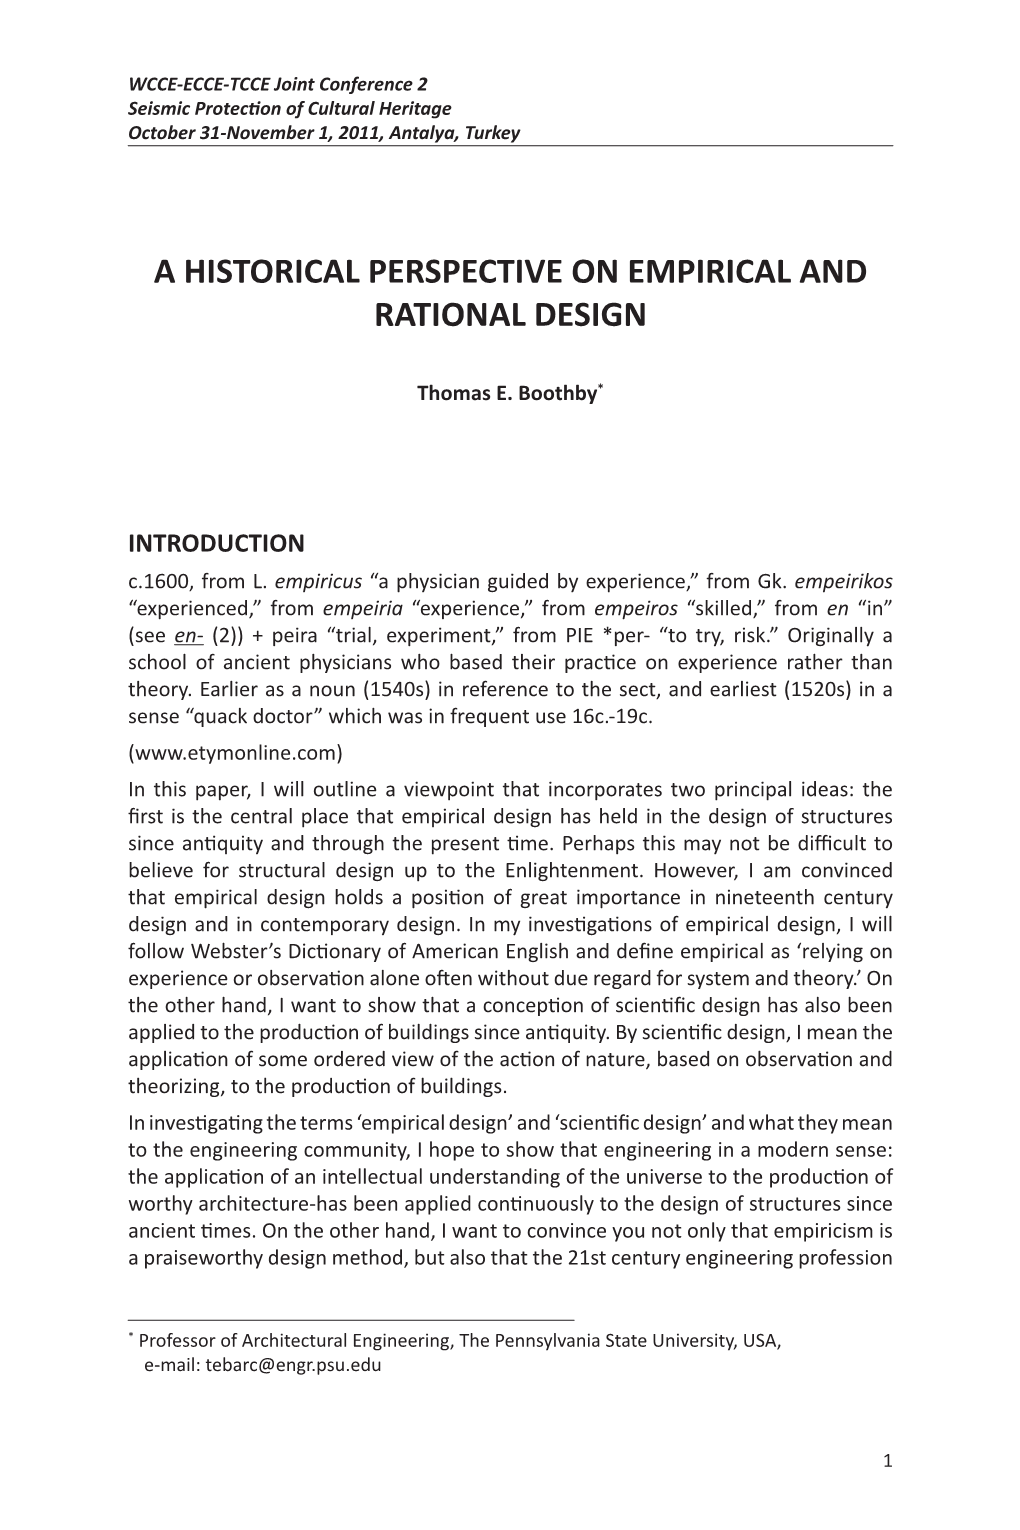 A Historical Perspective on Empirical and Rational Design